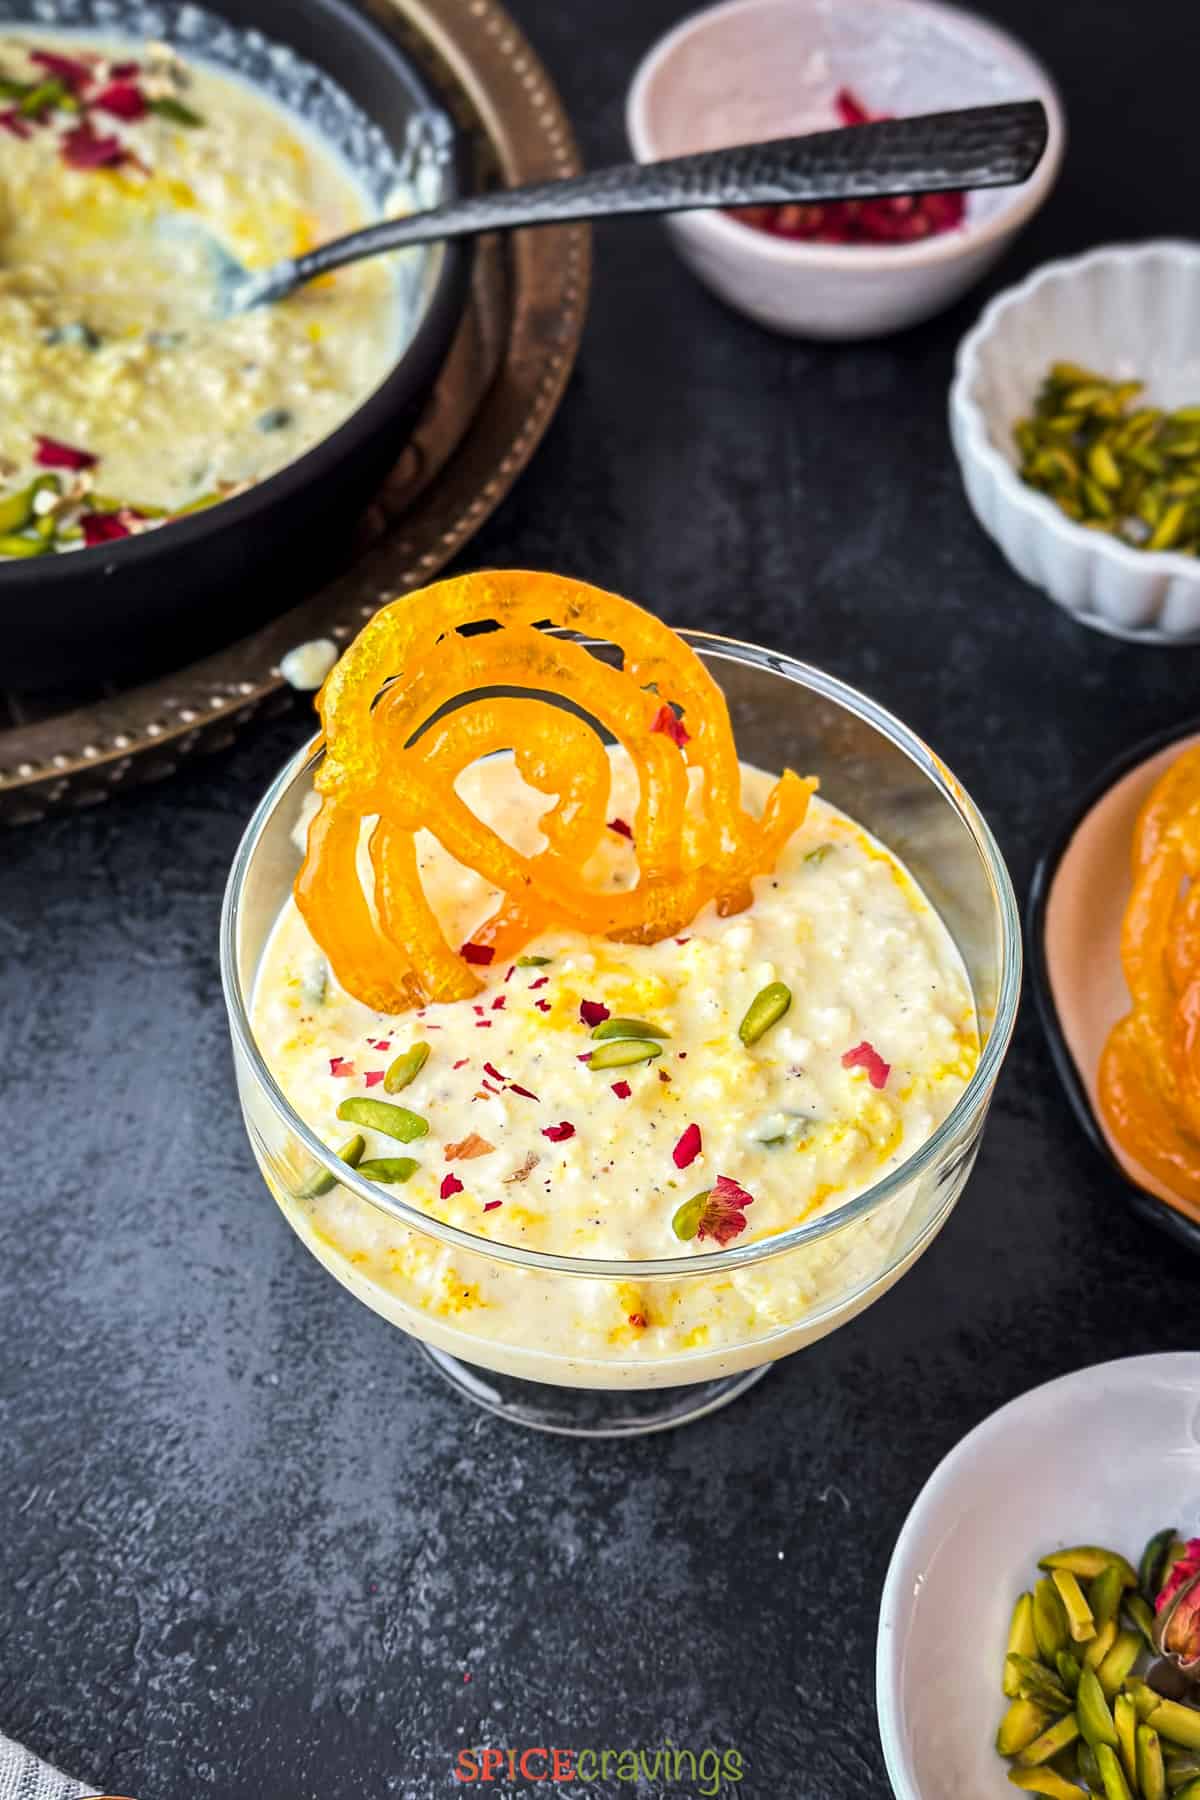 Dessert cup filled with Indian rabdi, garnished with rose, nuts and jalebi